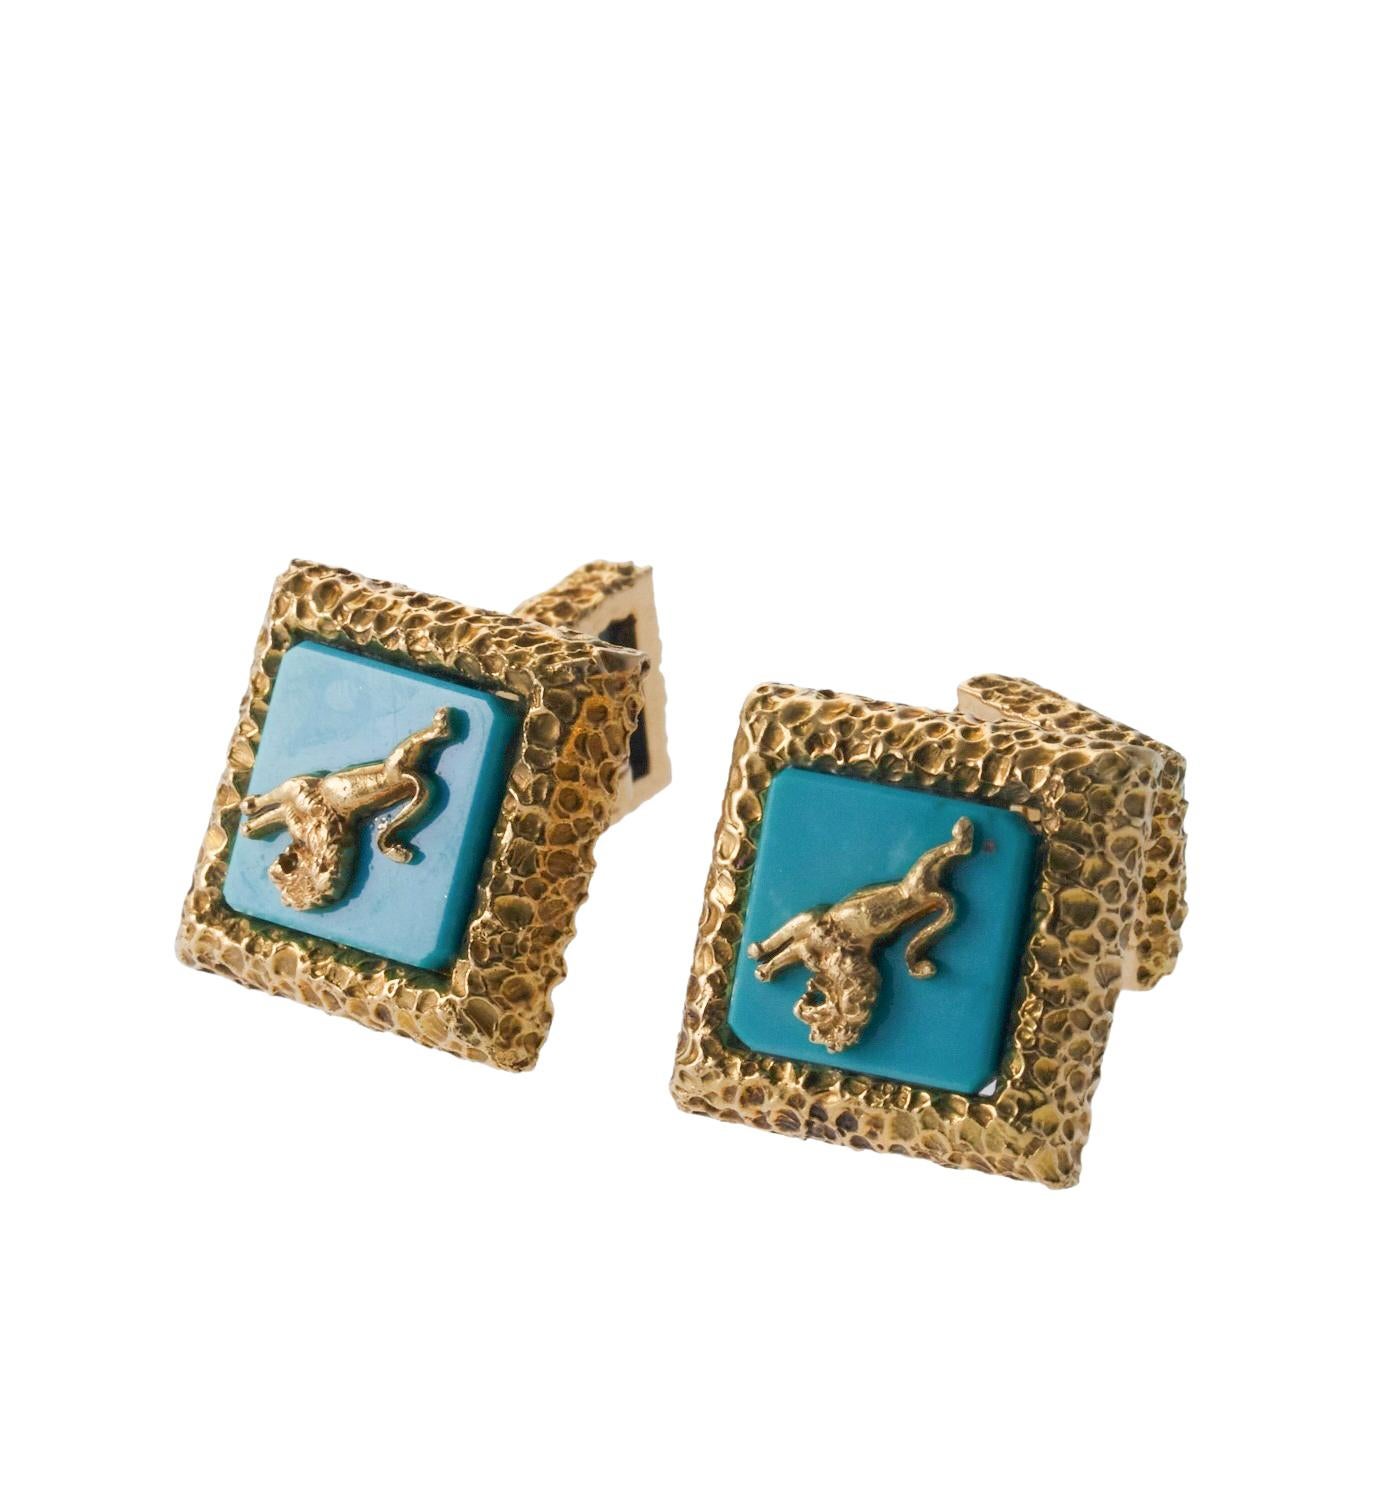 Pair of 18k gold lion cufflinks by David Webb, set with turquoise. Cufflinks top measure 18mm x 18mm, back is 11mm x 11mm. Marked: Webb, 18k. Weight is 30.8 grams.